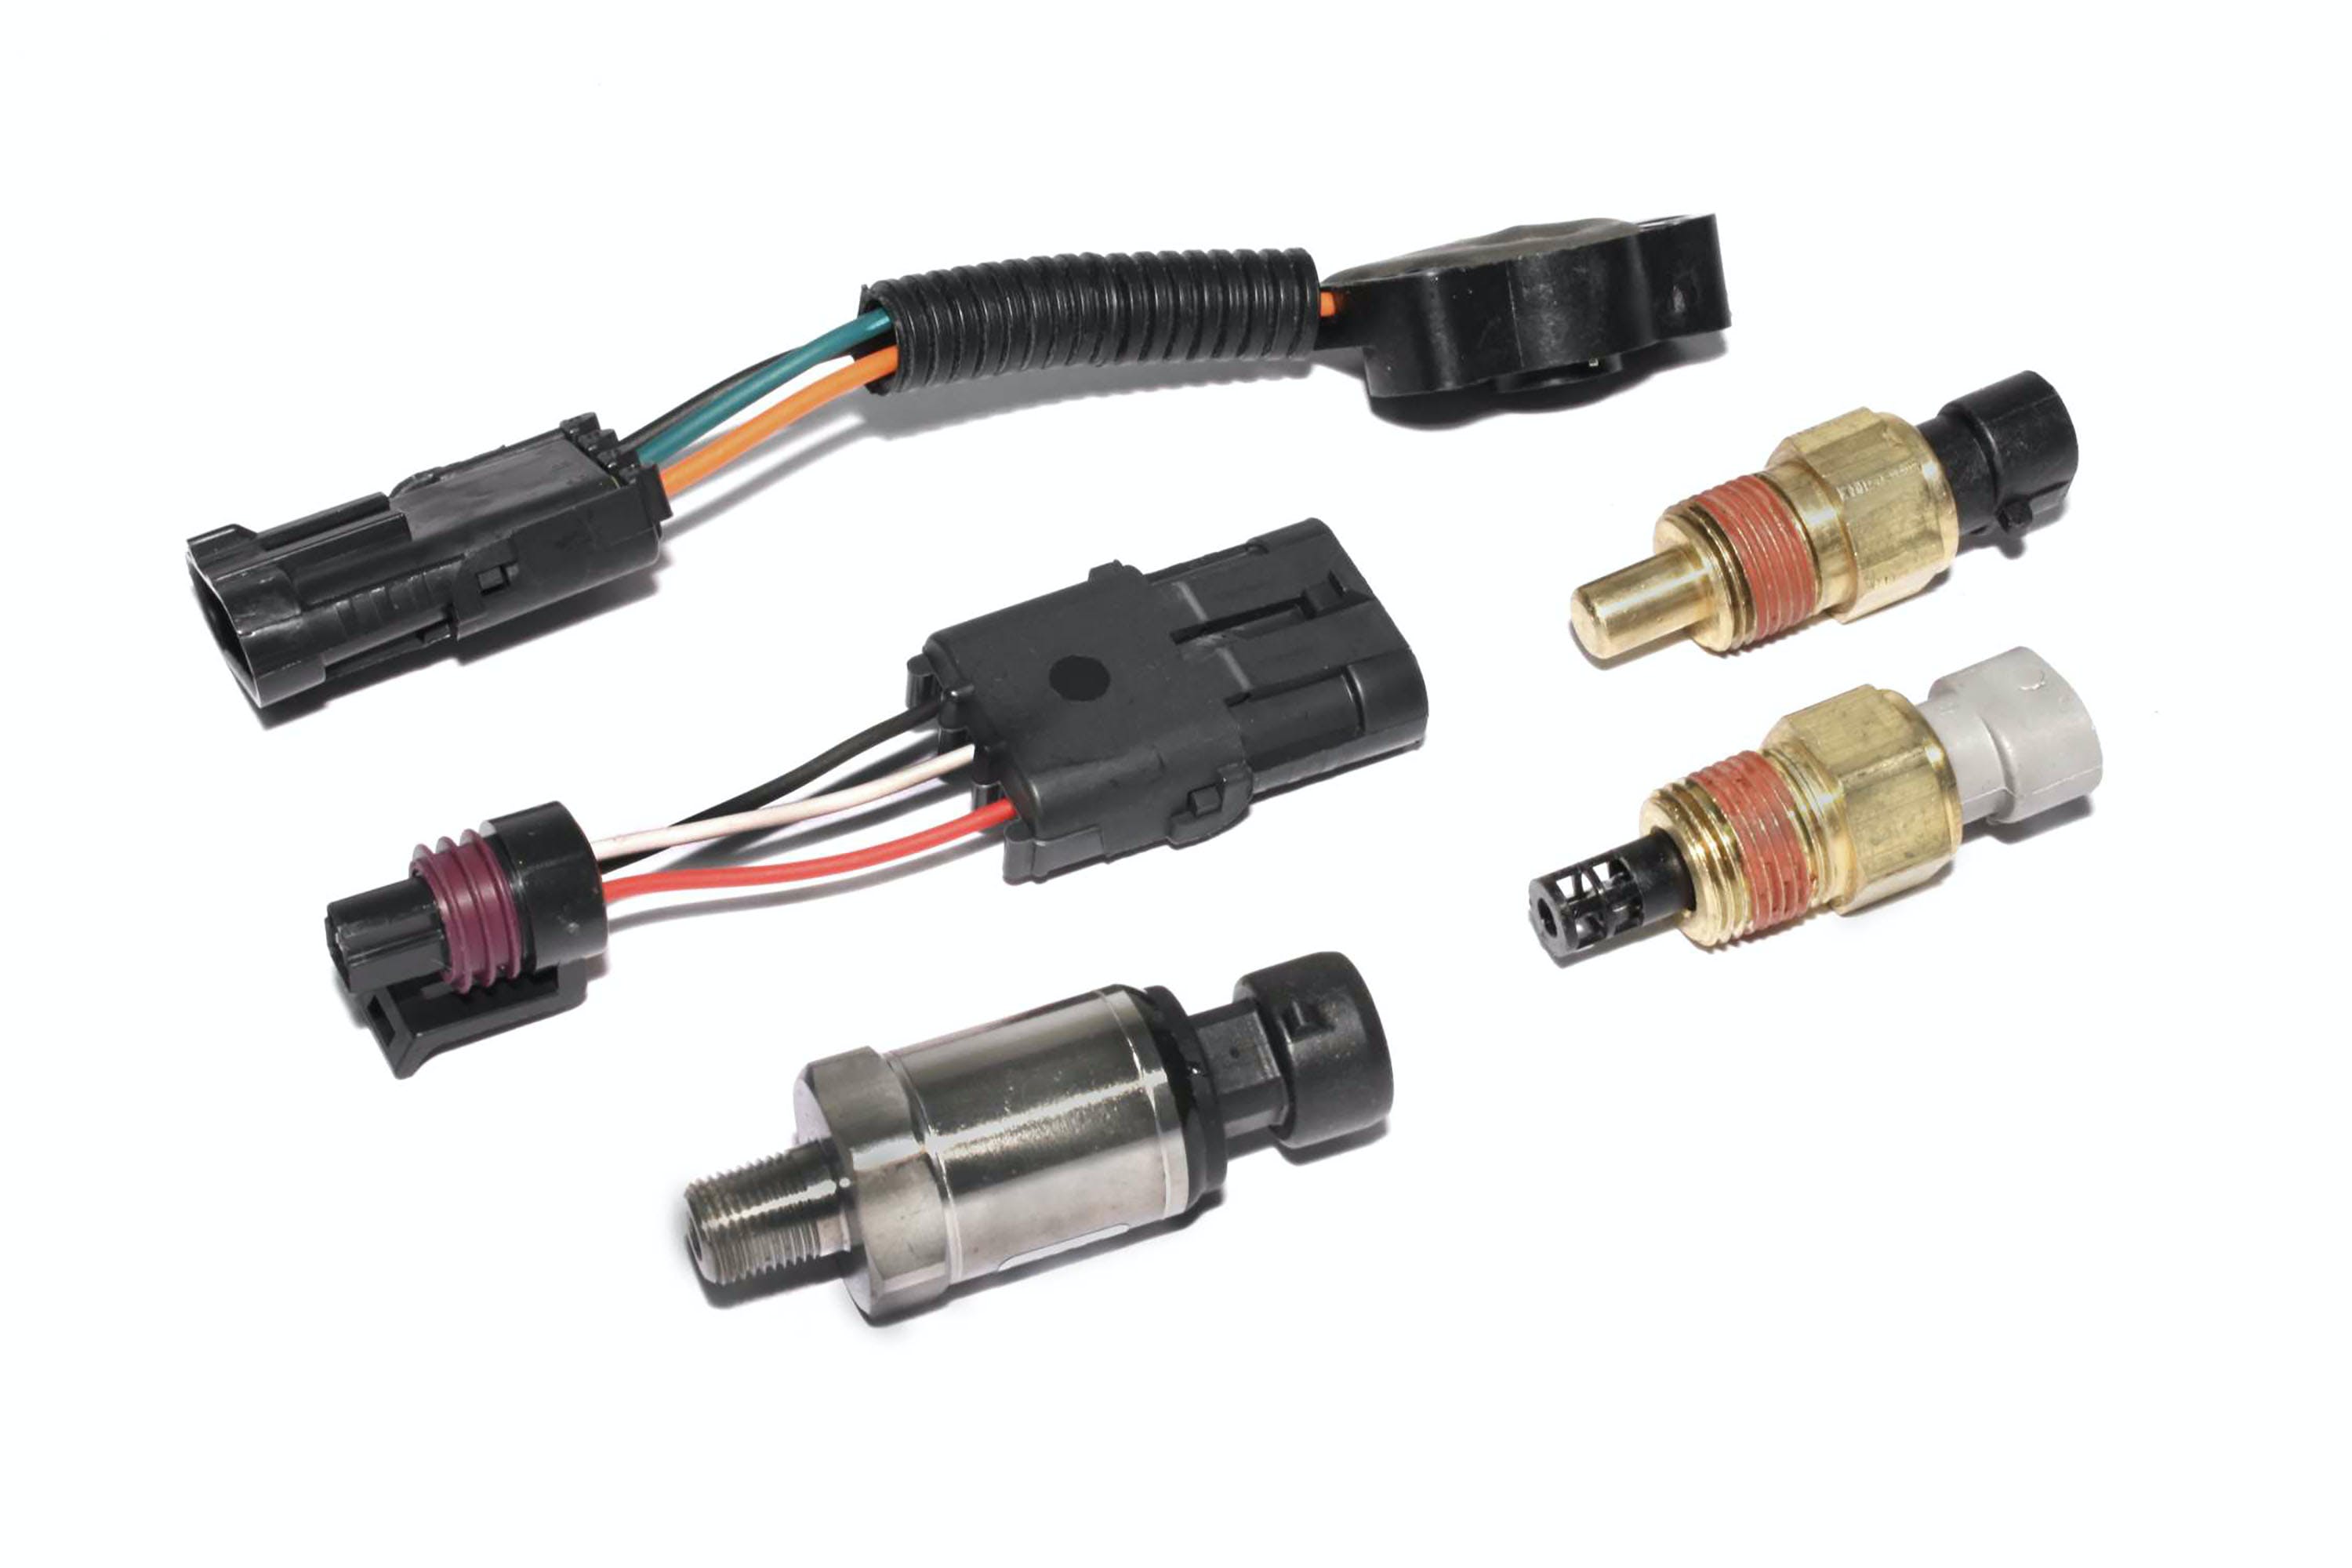 FAST - Fuel Air Spark Technology 307052 FAST 5 Bar Map Sensor Kit with Ford TPS.